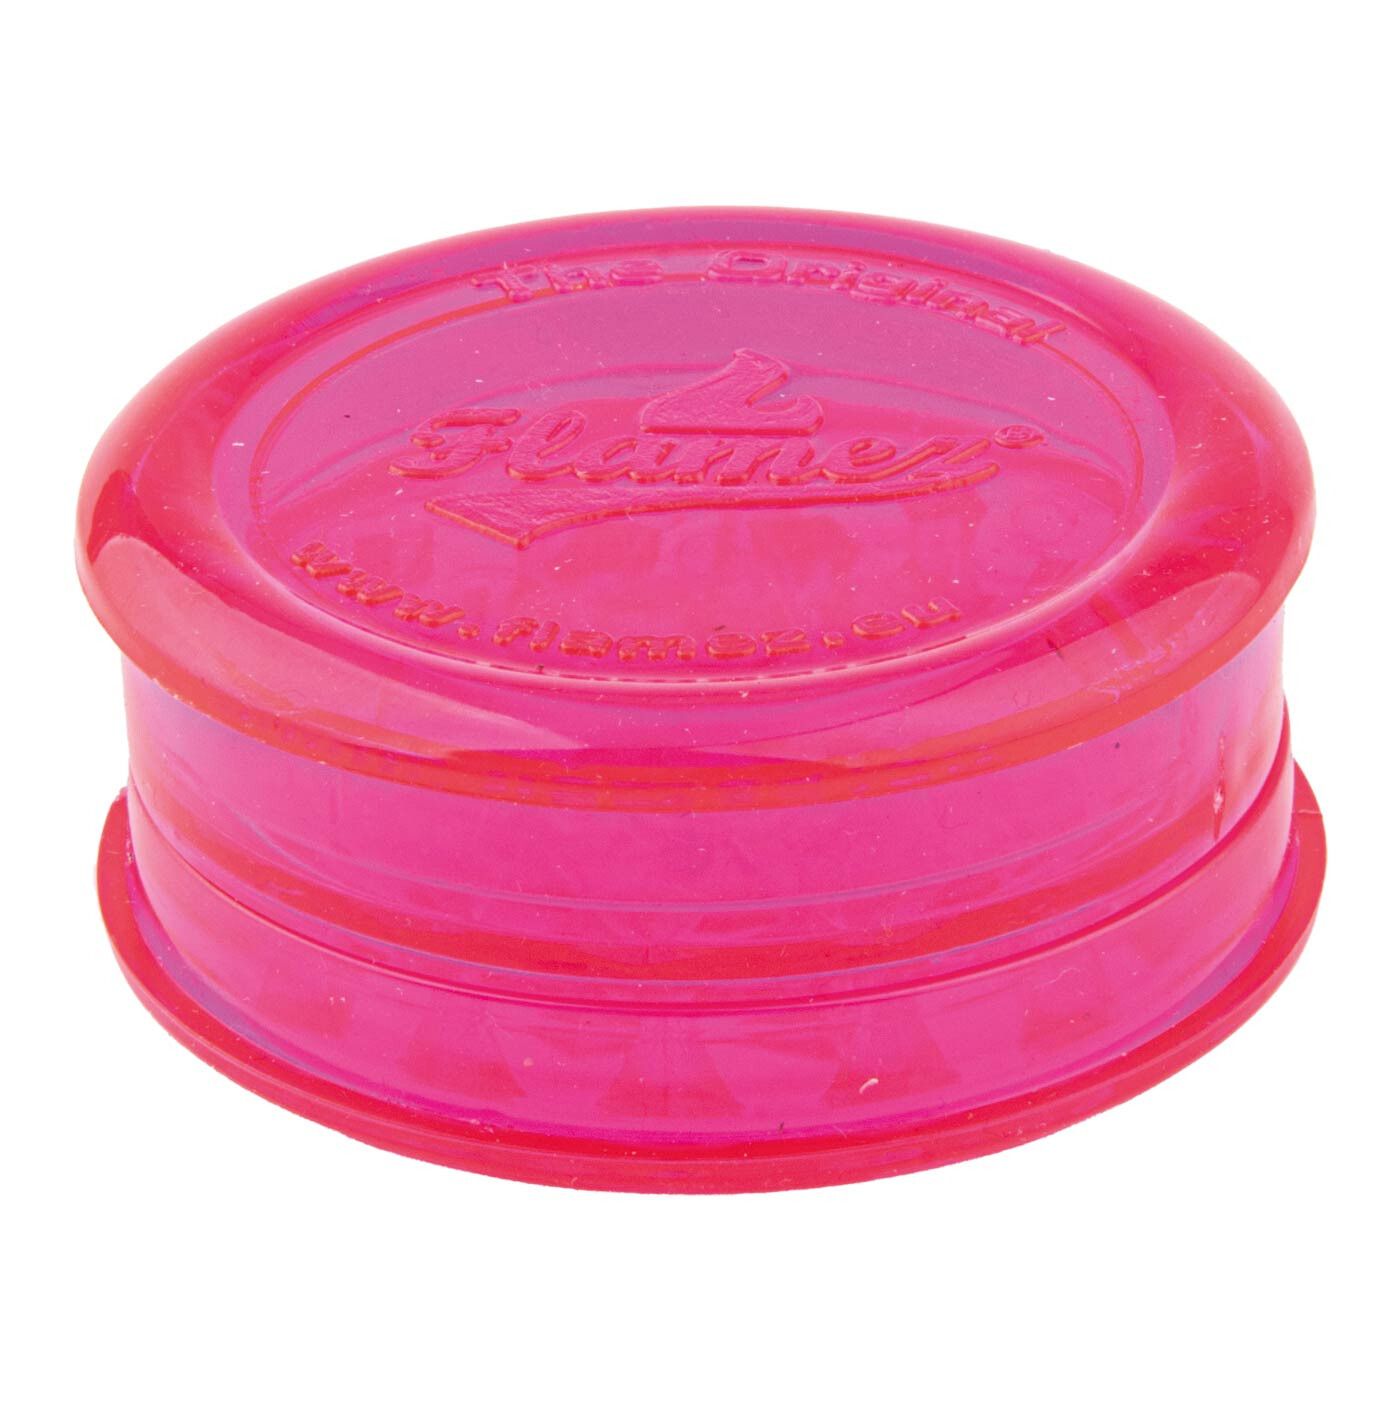 Acrylic Super Grinder With Stash Compartment Pink